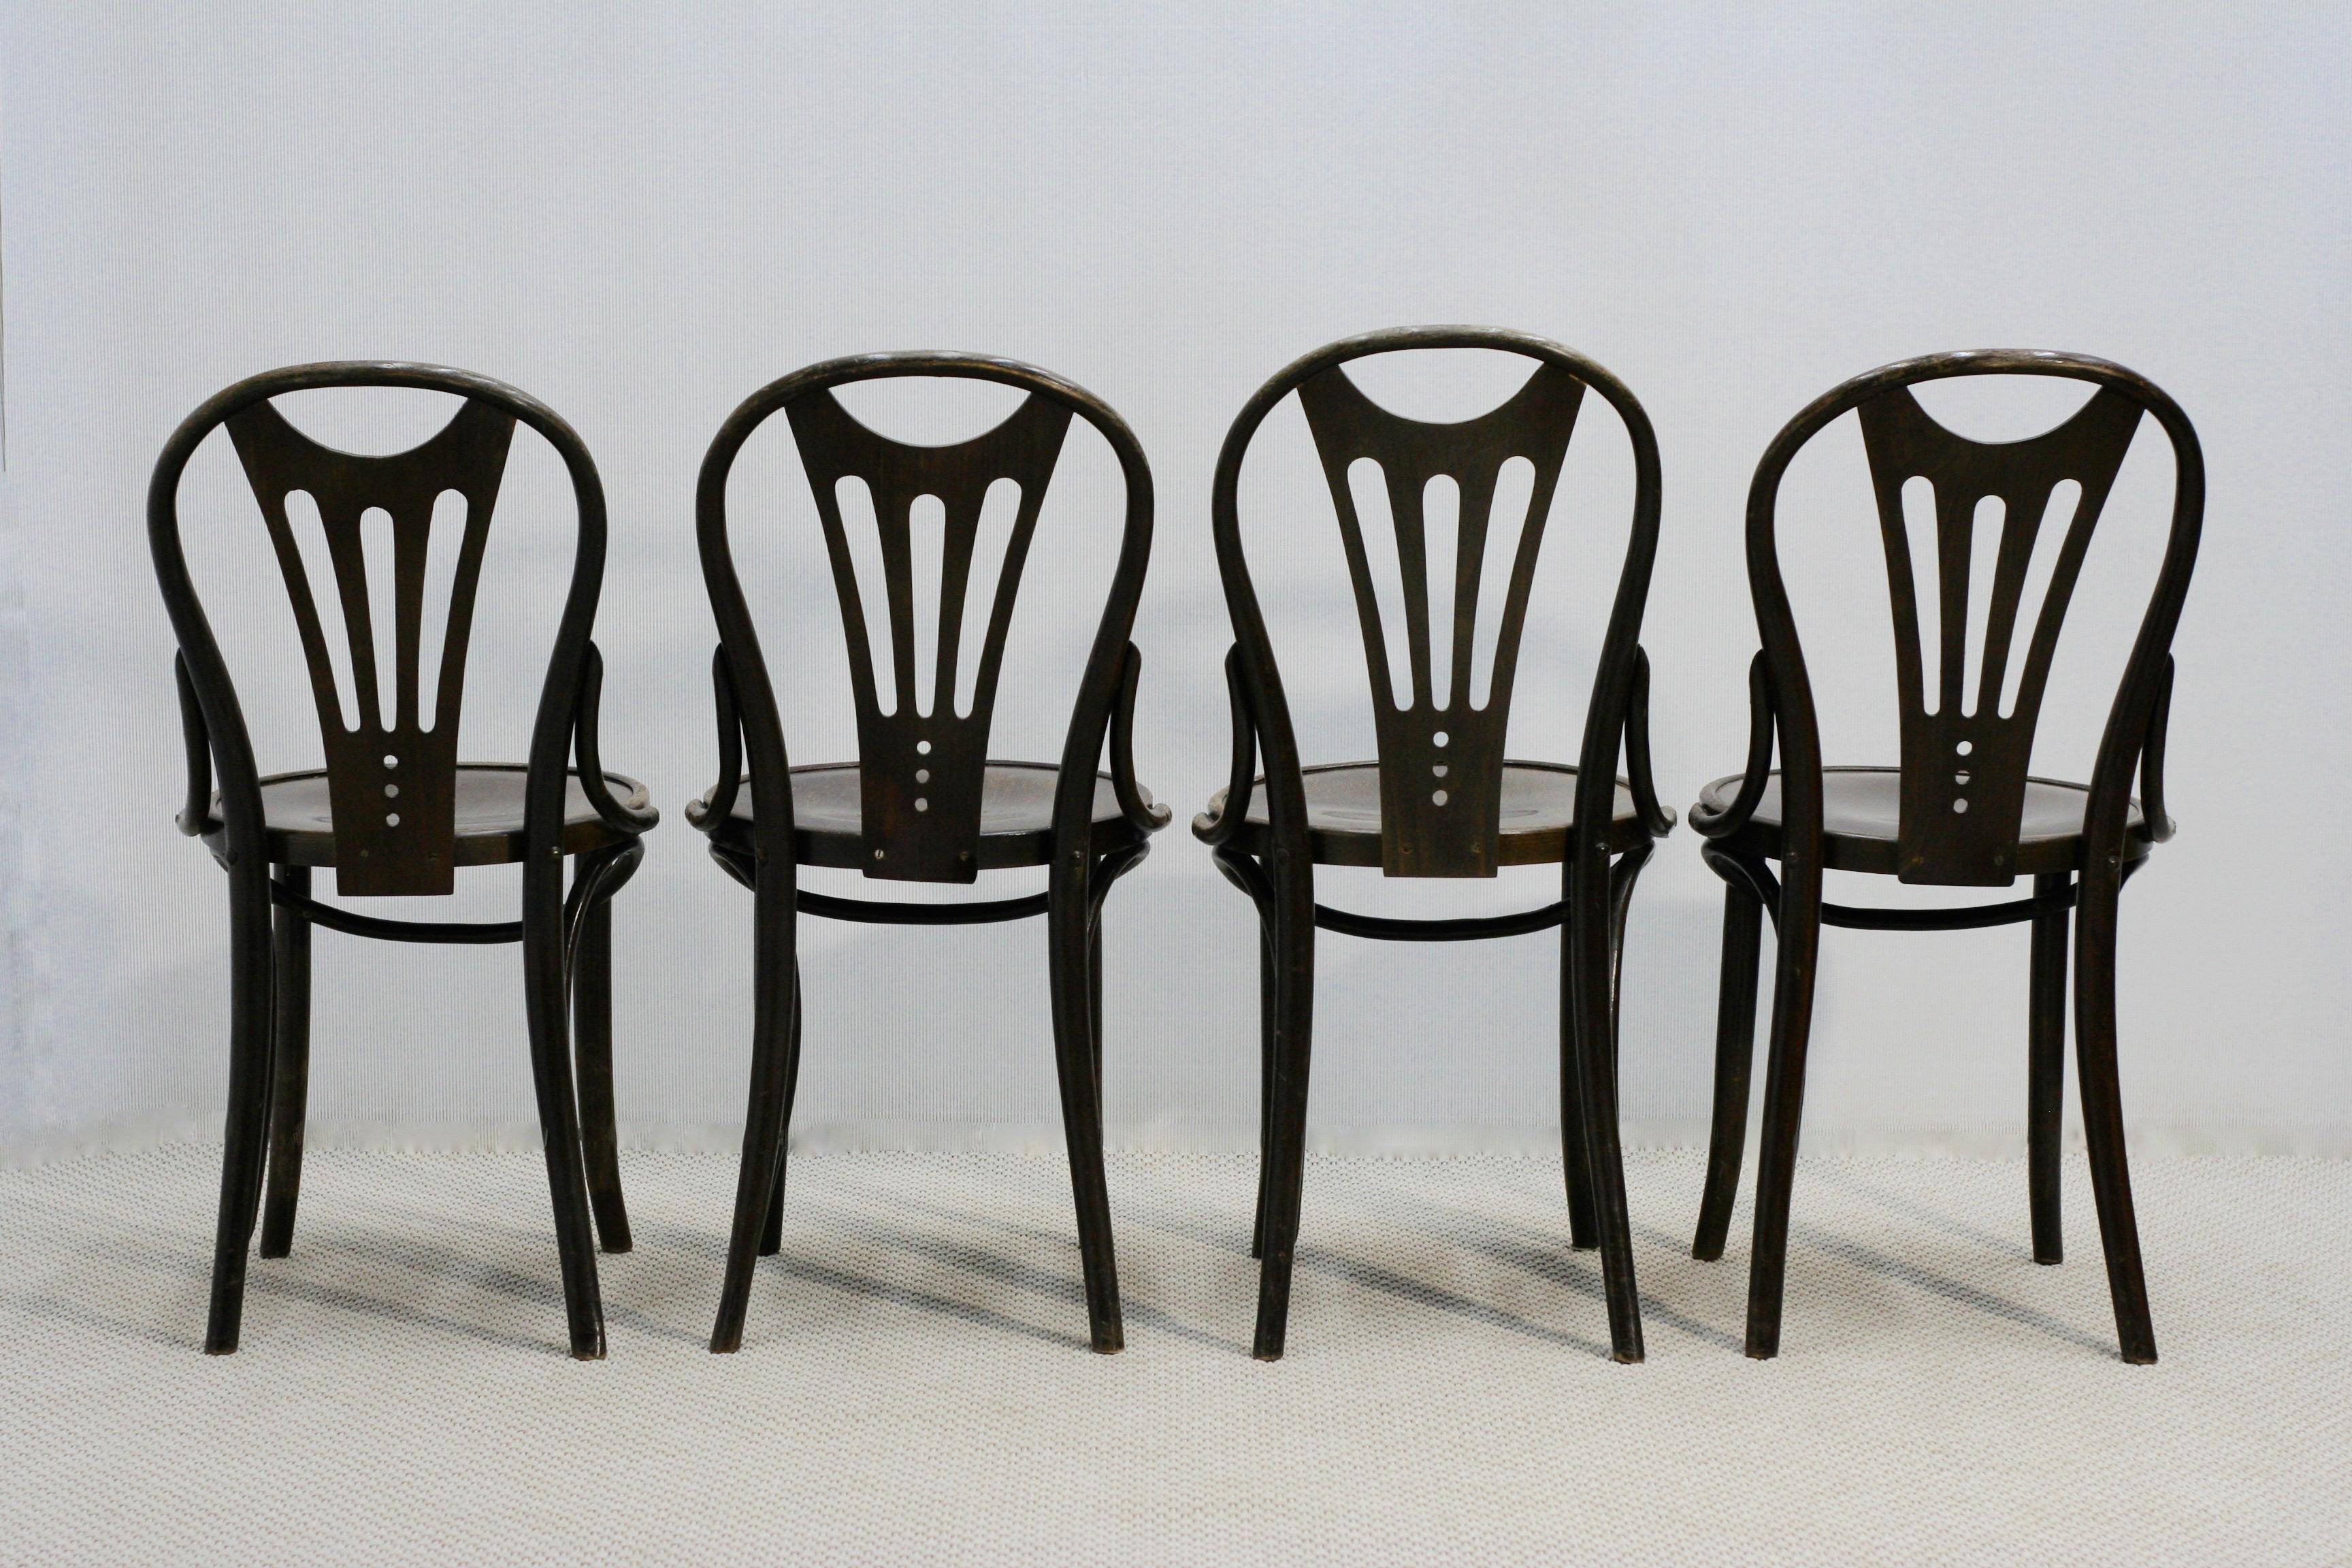 All the chairs are in good vintage condition, they are stabile, have no structure damages. Never been restored! It's a chance to have fully original bentwood chairs.
Marked-Made in Romania.